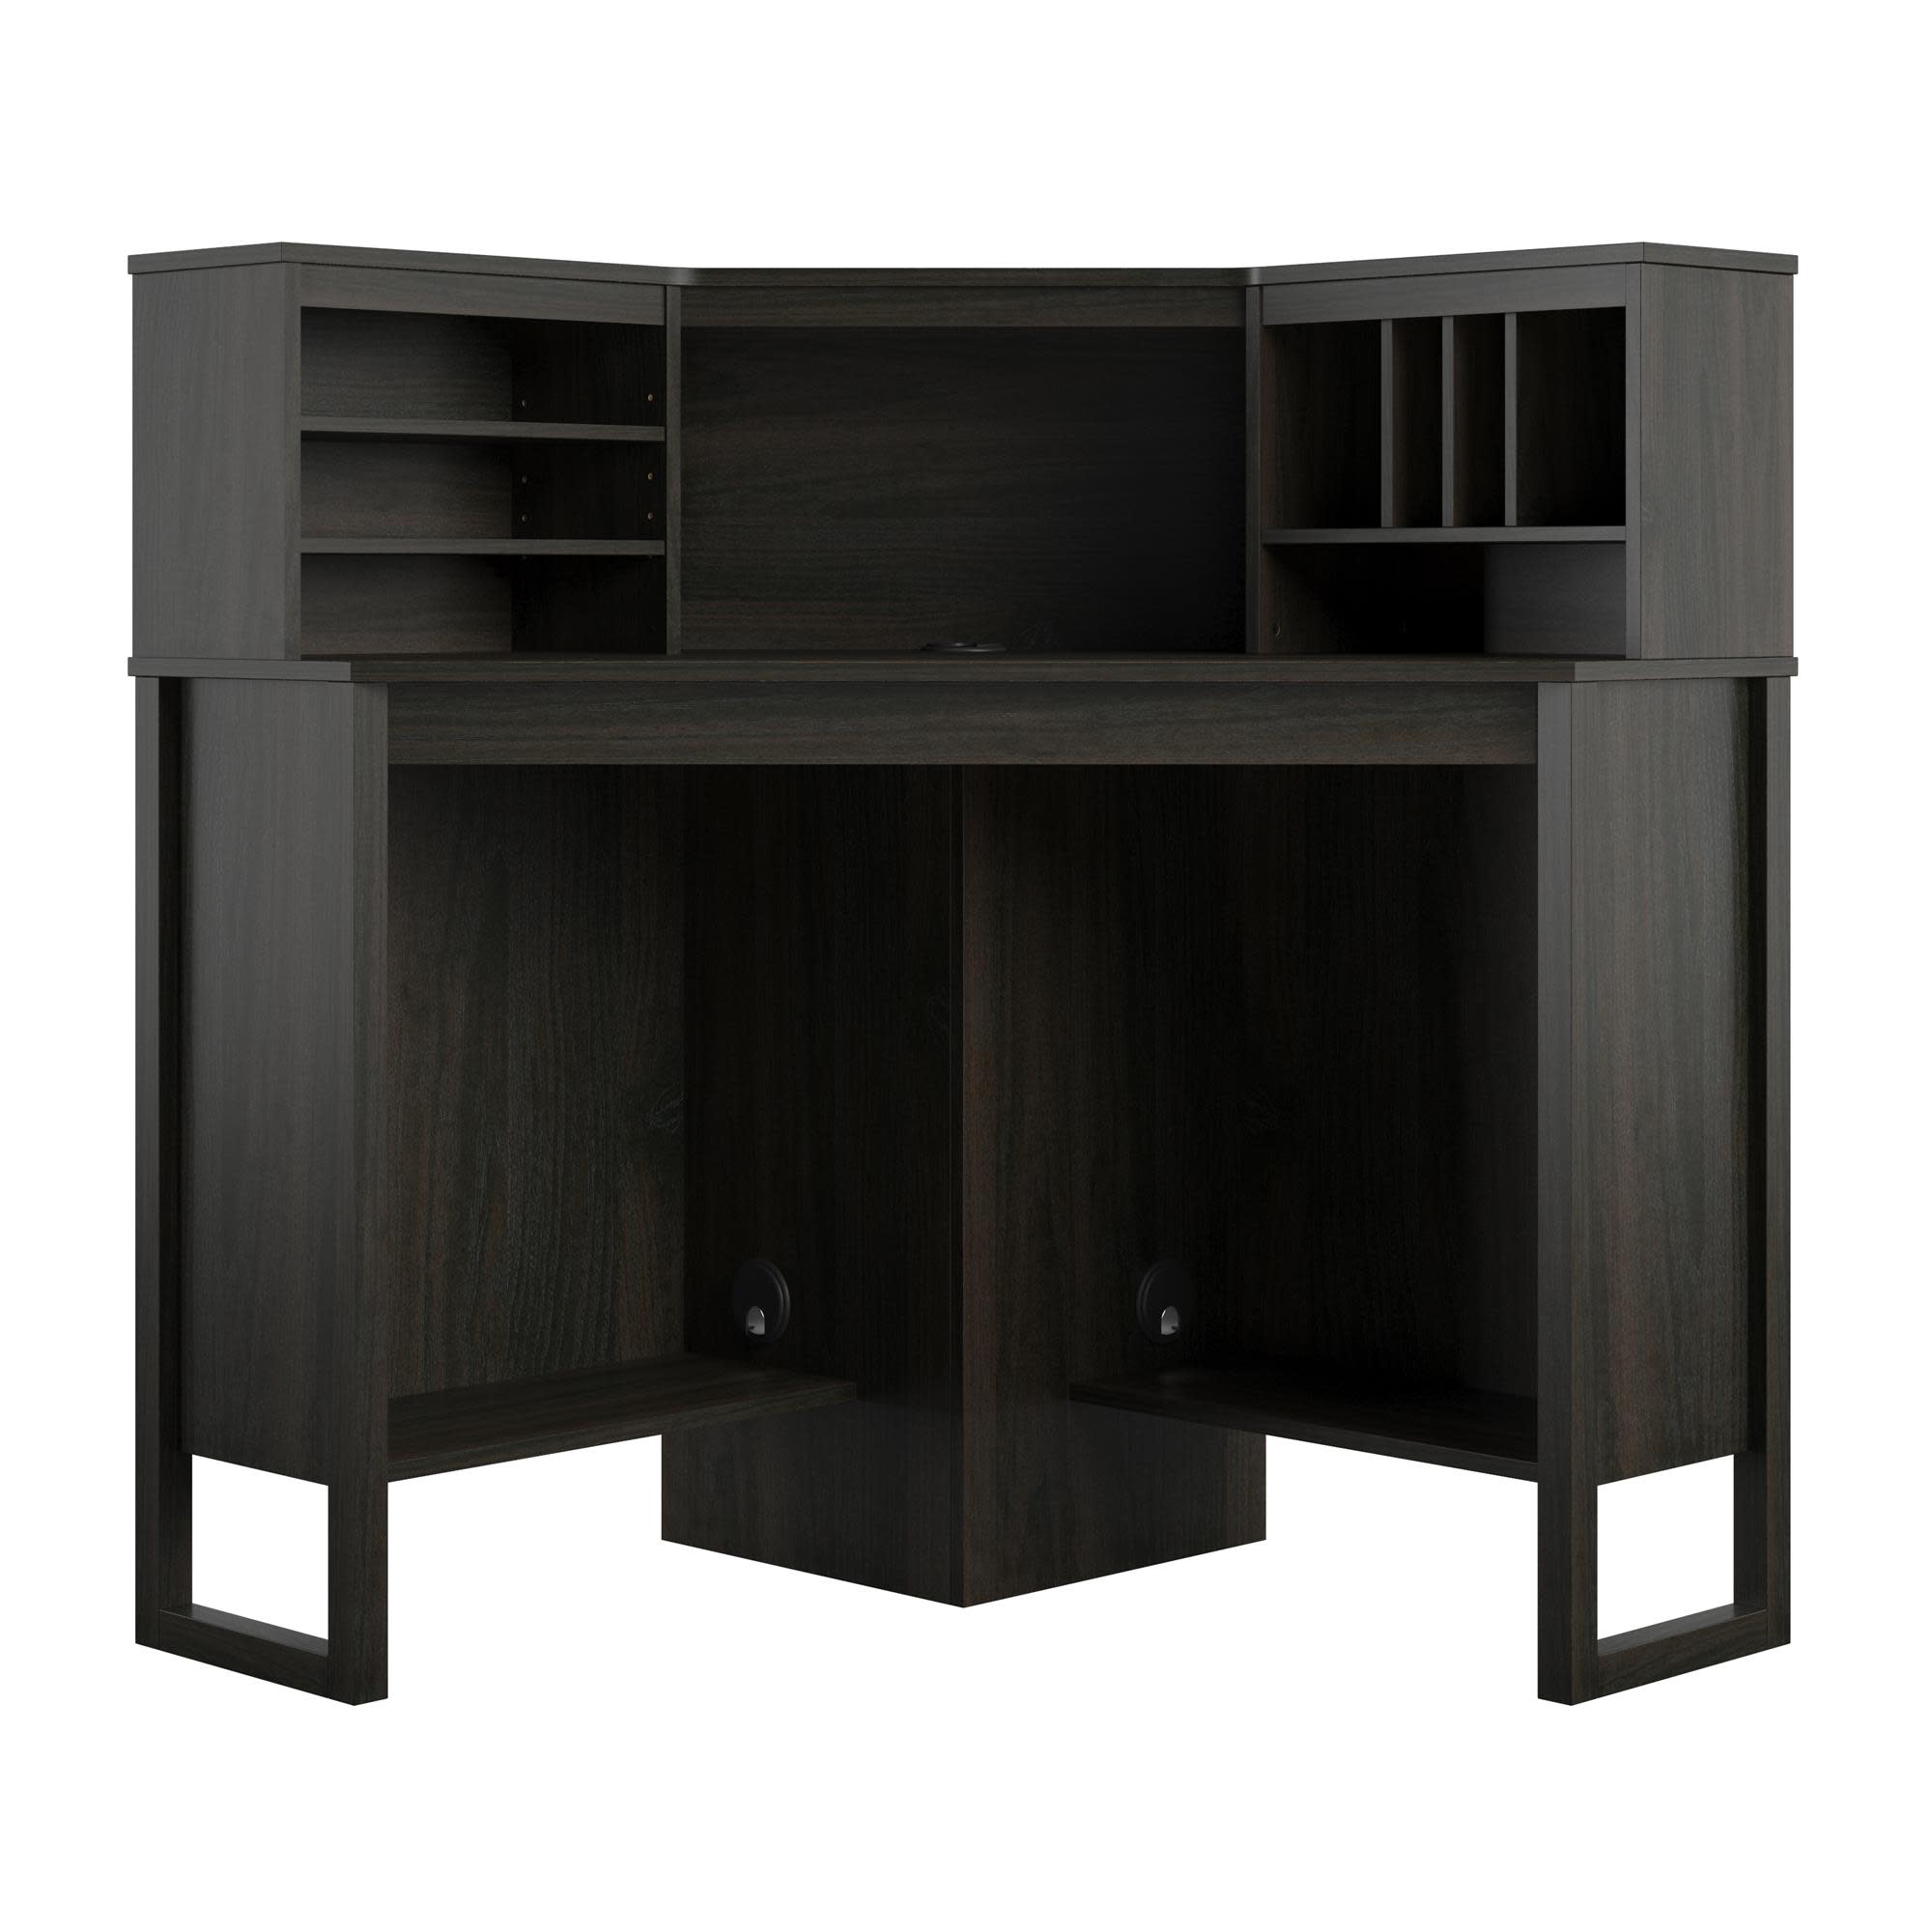 Mainstays Corner Desk With Hutch For 49 Free Shipping